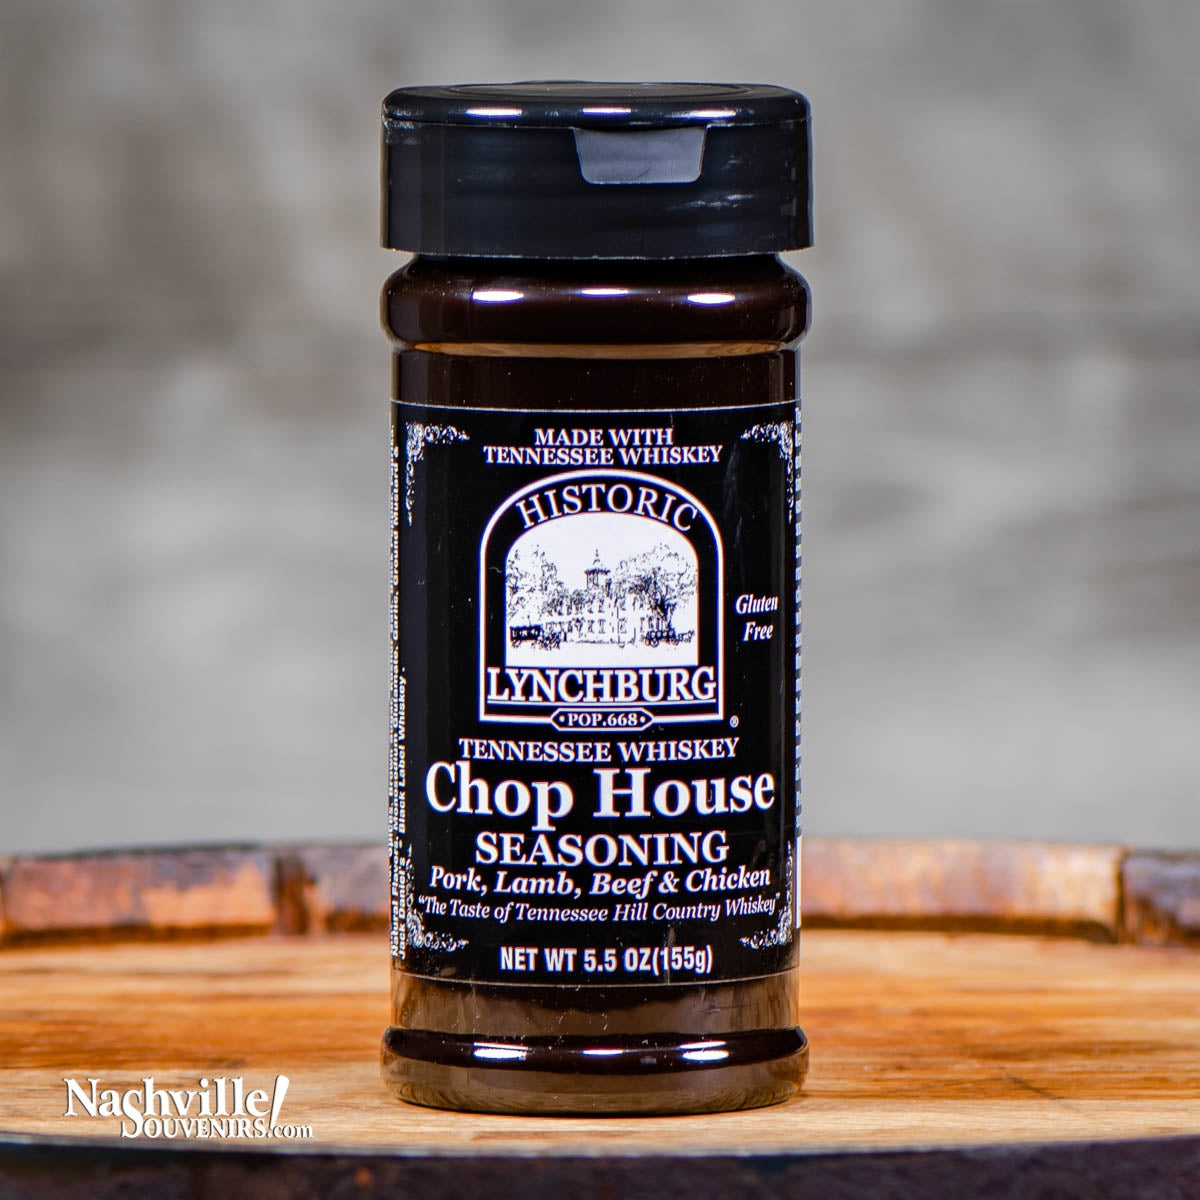 Historic Lynchburg Chop House Seasoning has been used by the people of Lynchburg for many years to enhance the flavor of all their wonderful meals. It's a great all purpose seasoning for for meats, vegetables, soups and more.